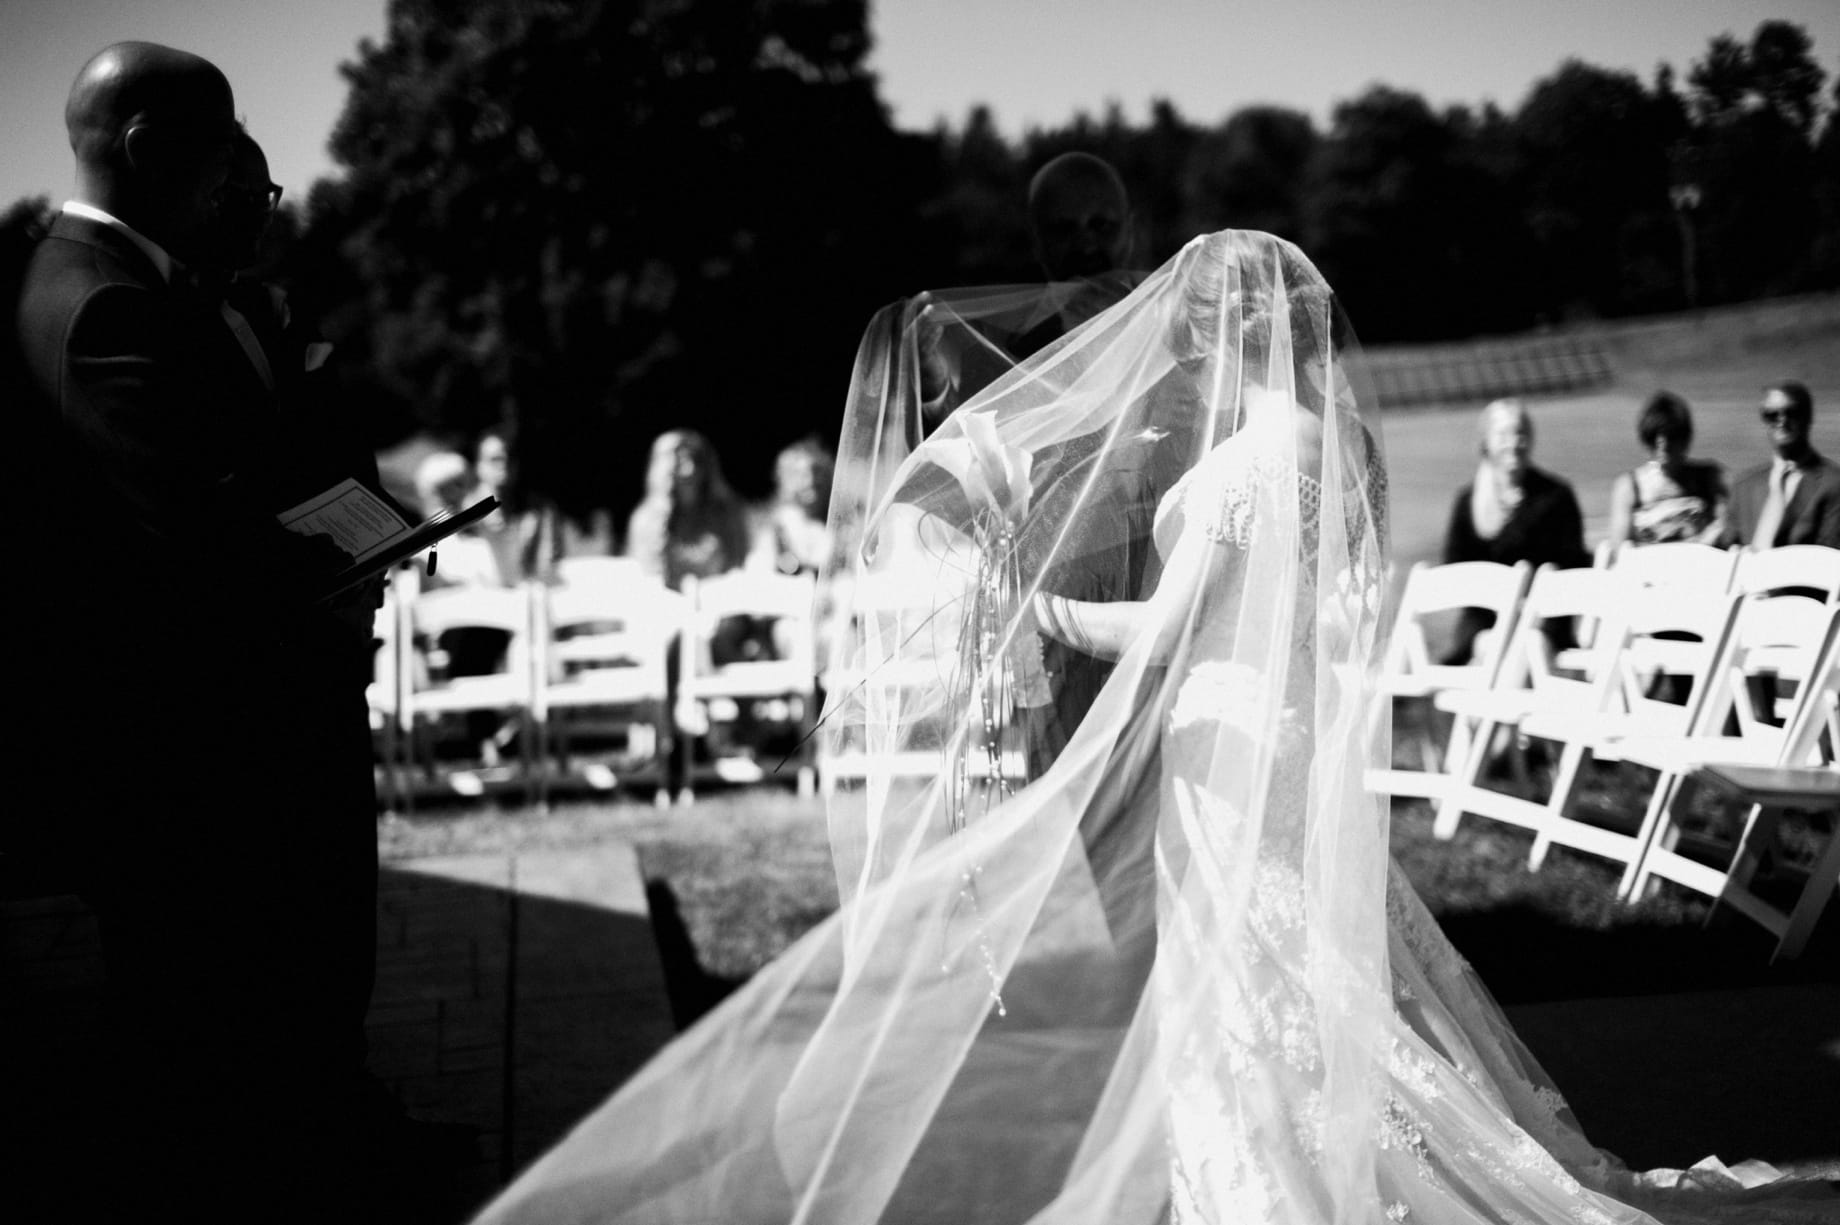 bride with long veil